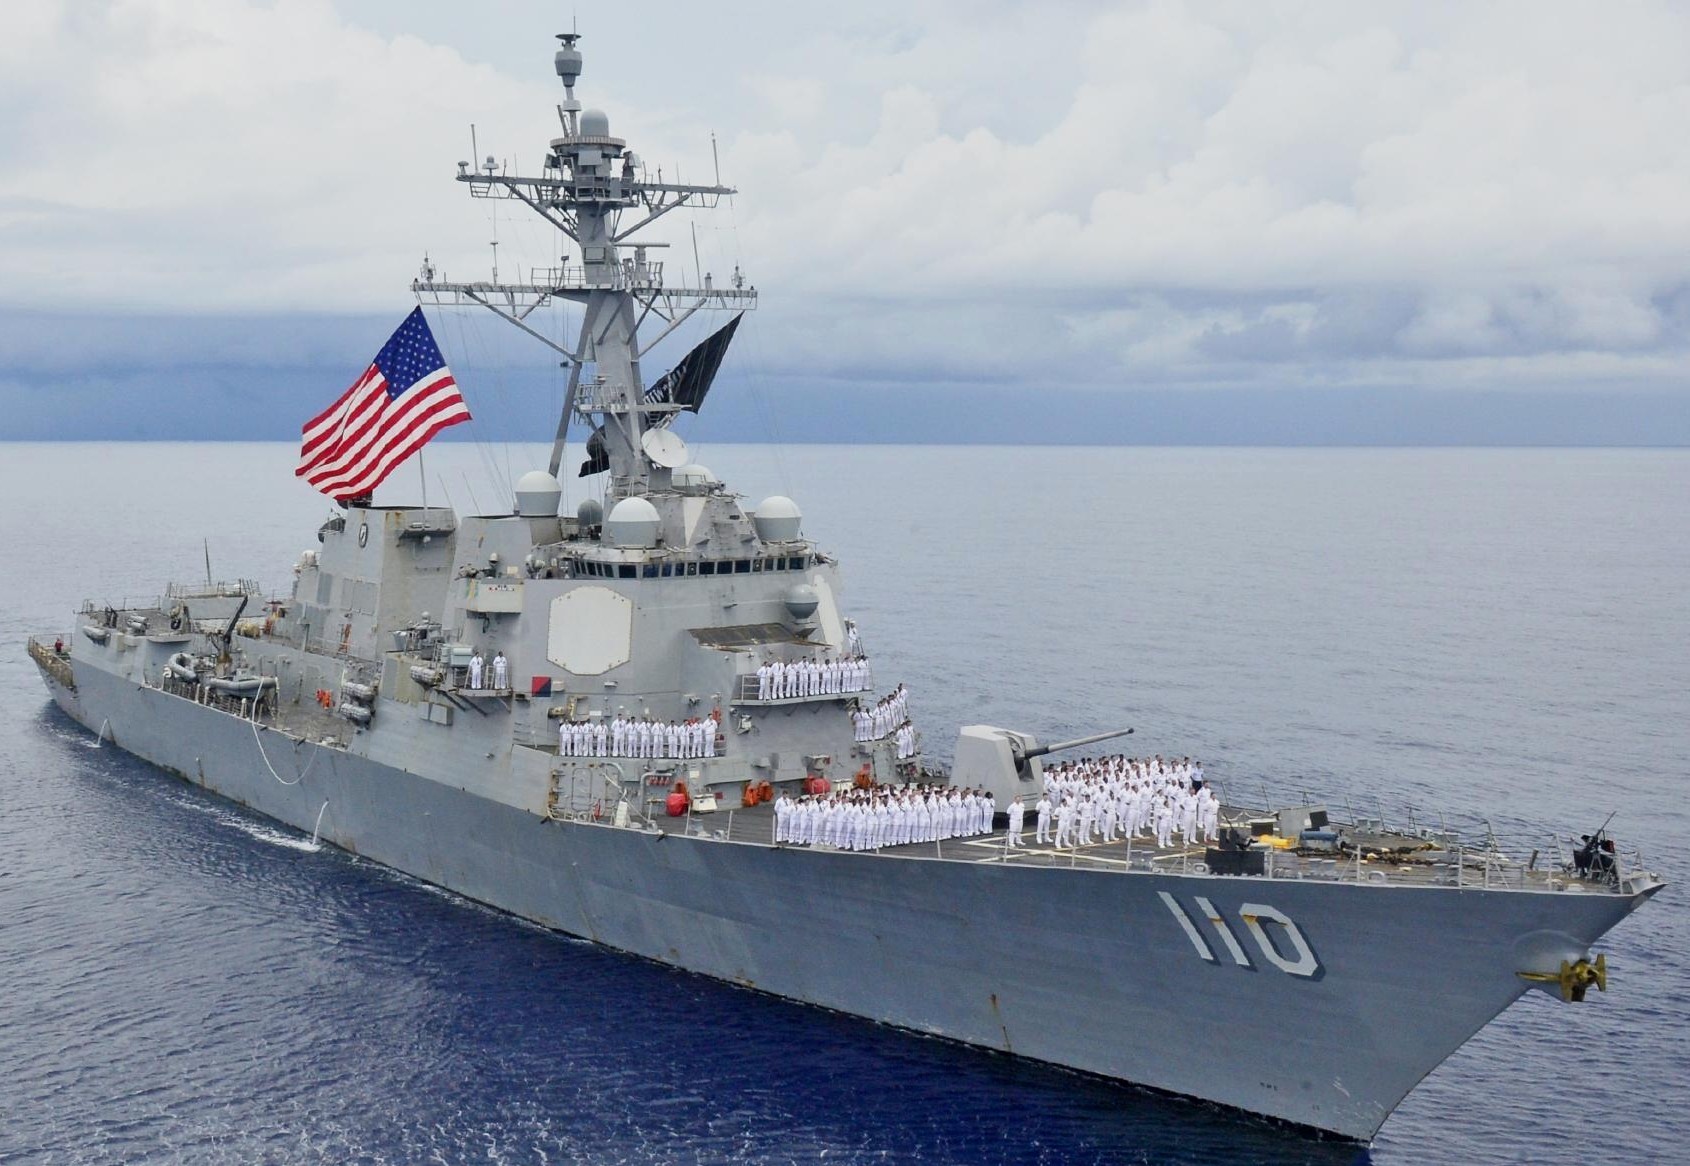 ddg-110 uss william p. lawrence arleigh burke class guided missile destroyer aegis us navy 50